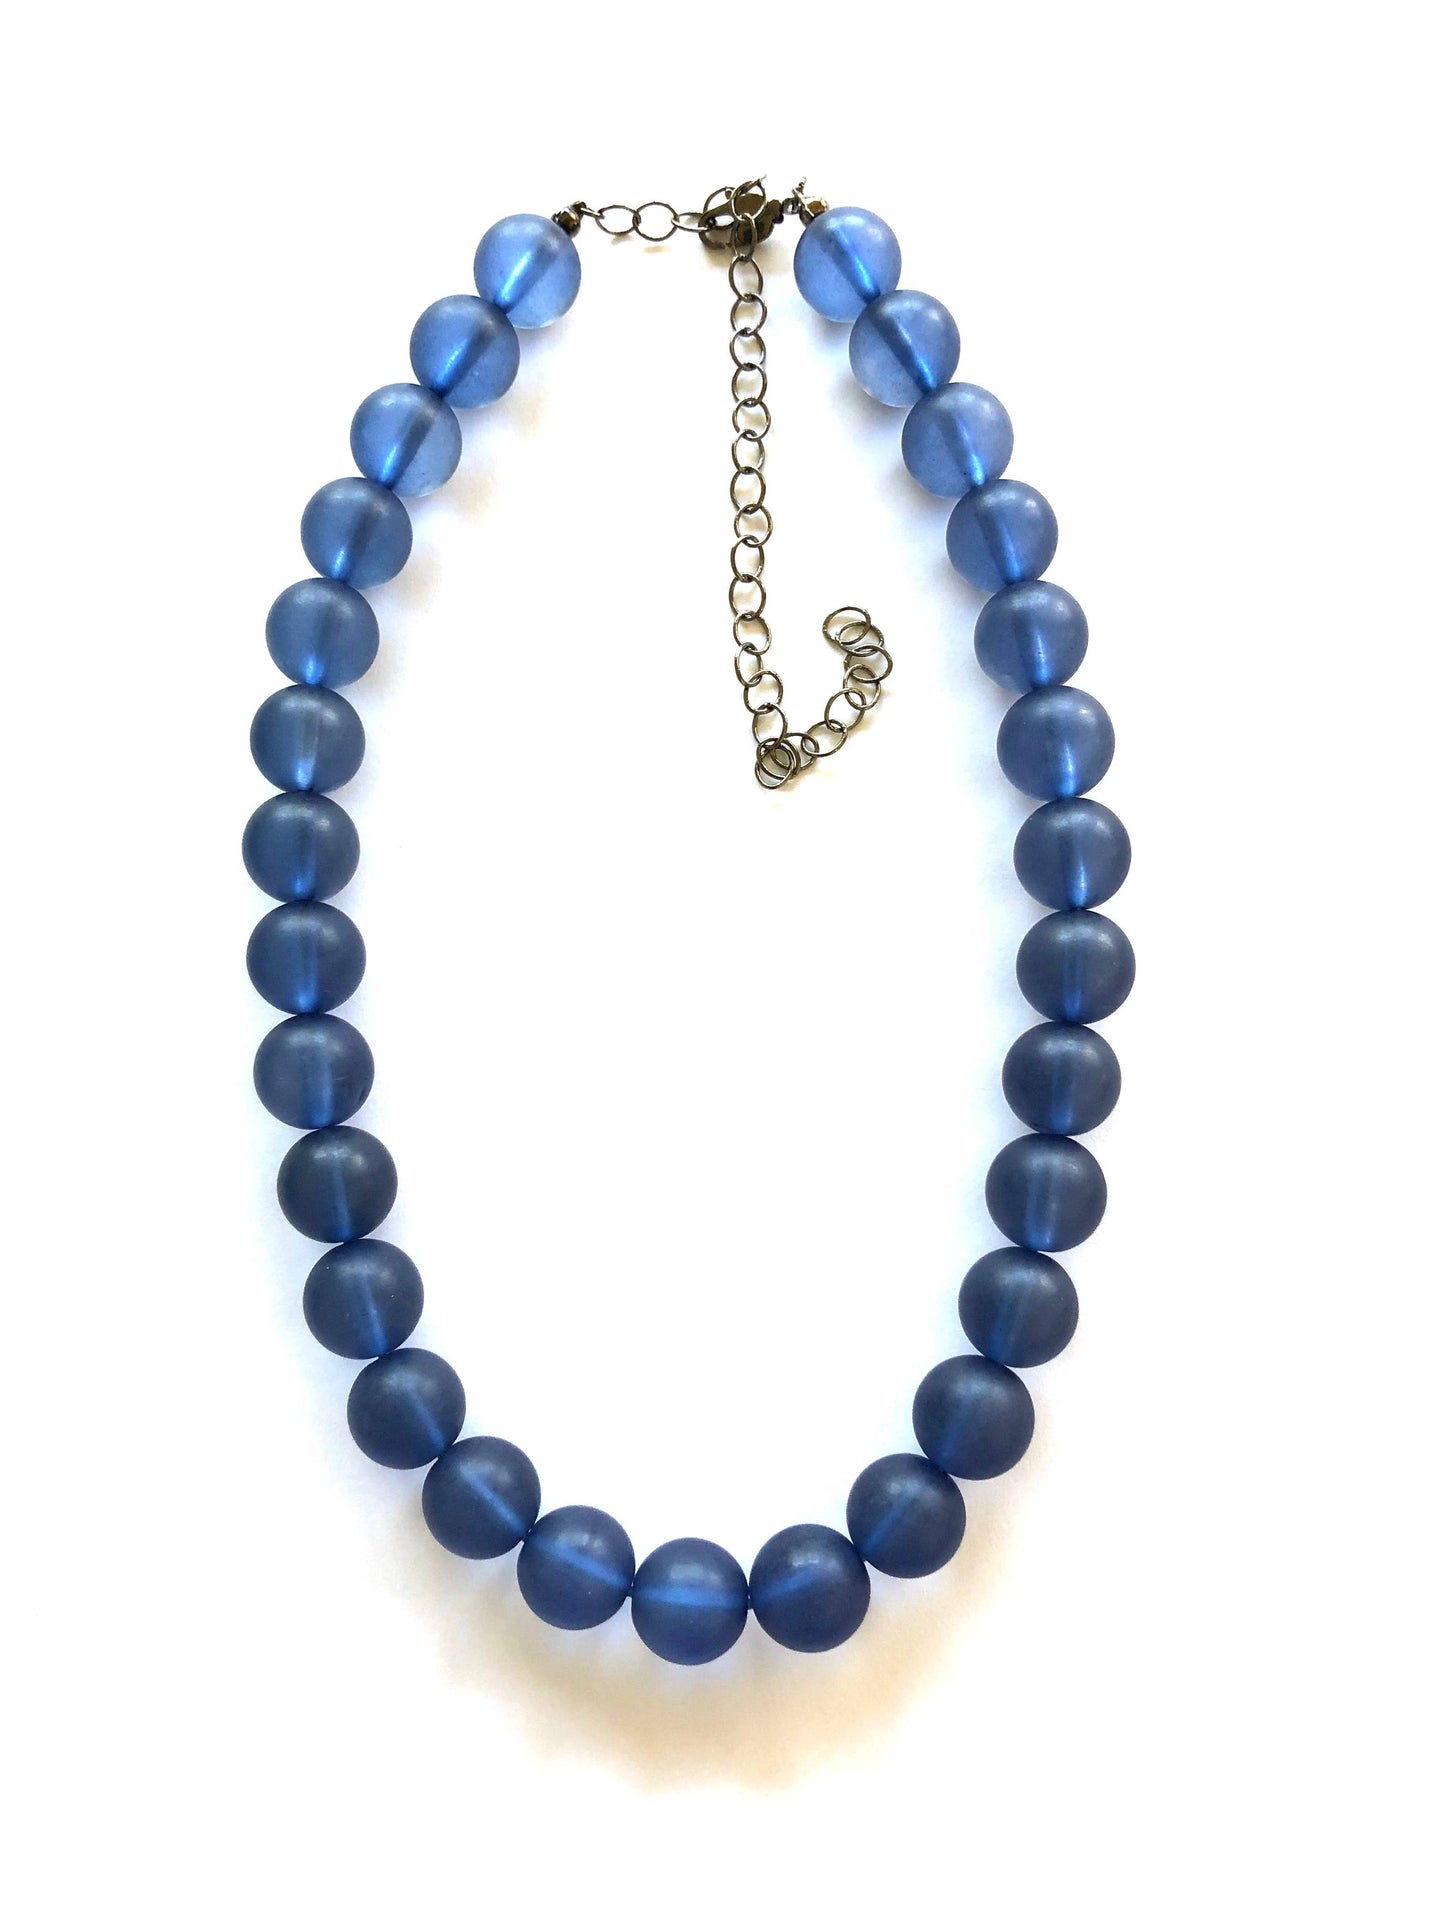 Leetie Lovendale - Denim Blue Beaded Vintage Lucite Chunky Marco Necklace